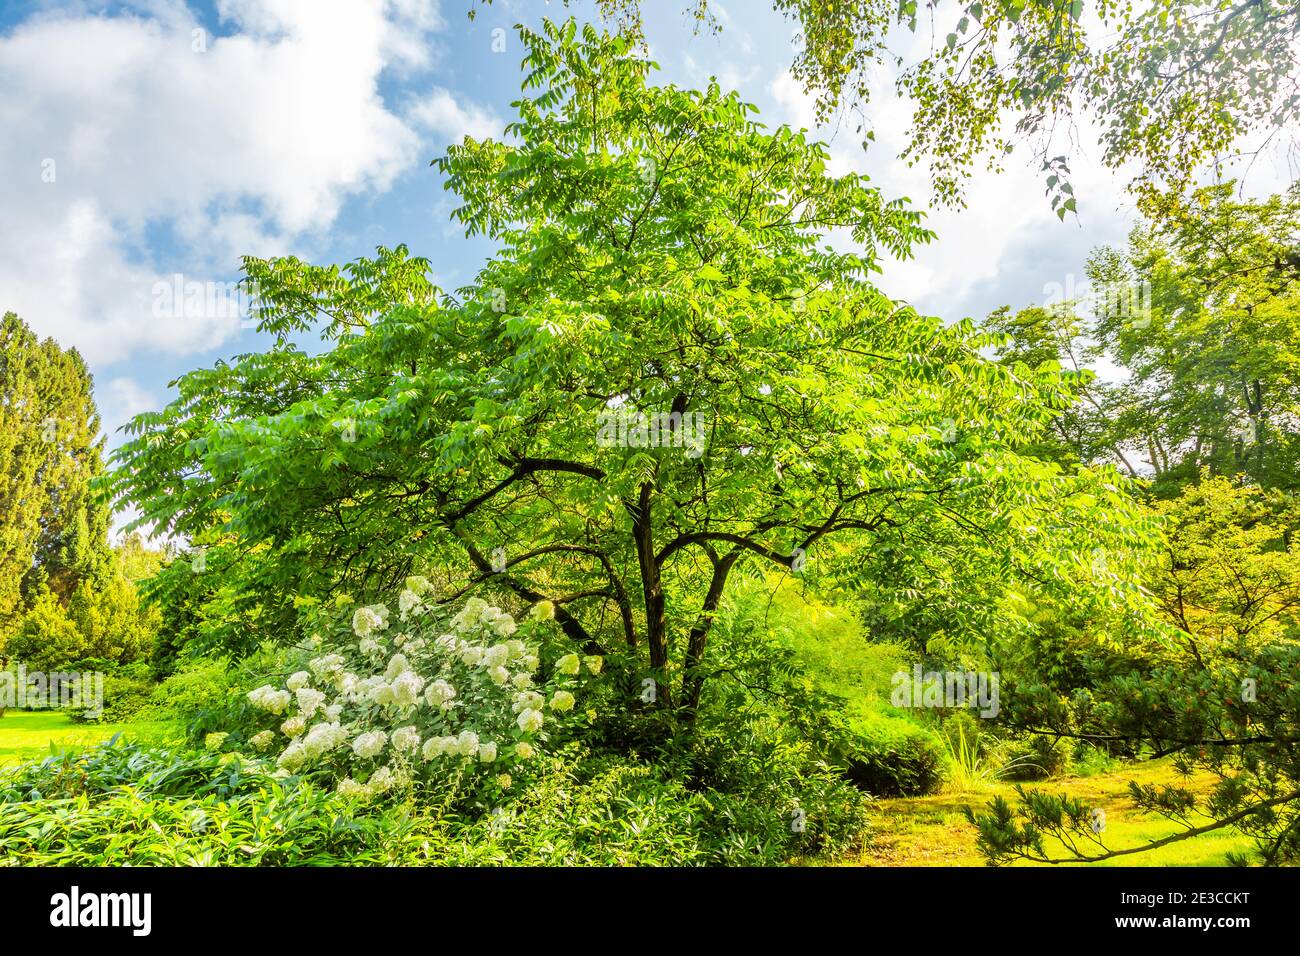 Grey walnut tree, Juglans cinerea, with in the foreground a flowering Hydrangea paniculata Limelight with green creamy white flowers Stock Photo